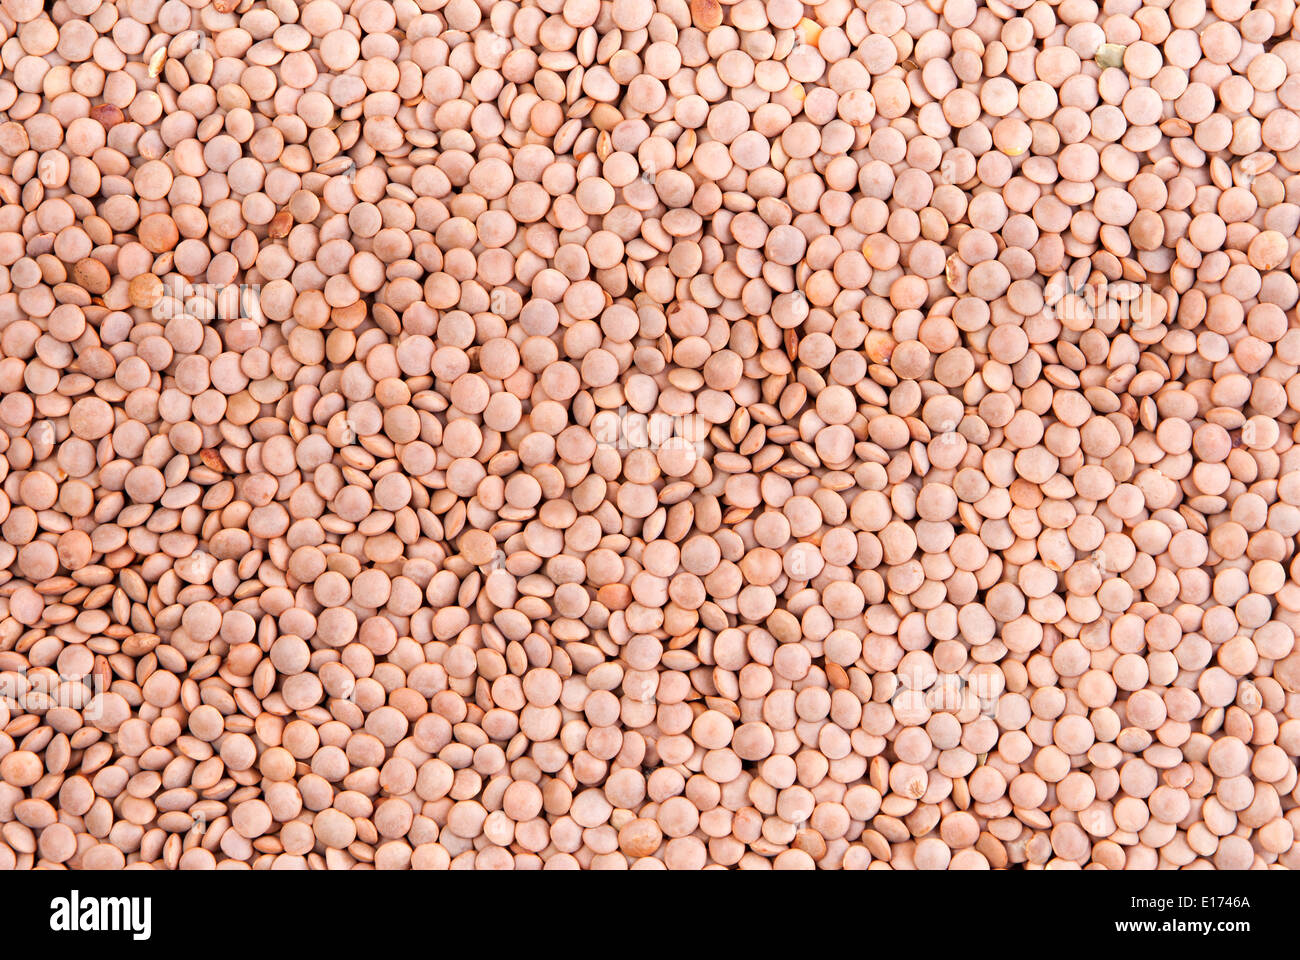 Uncooked brown lentil background. Top view Stock Photo